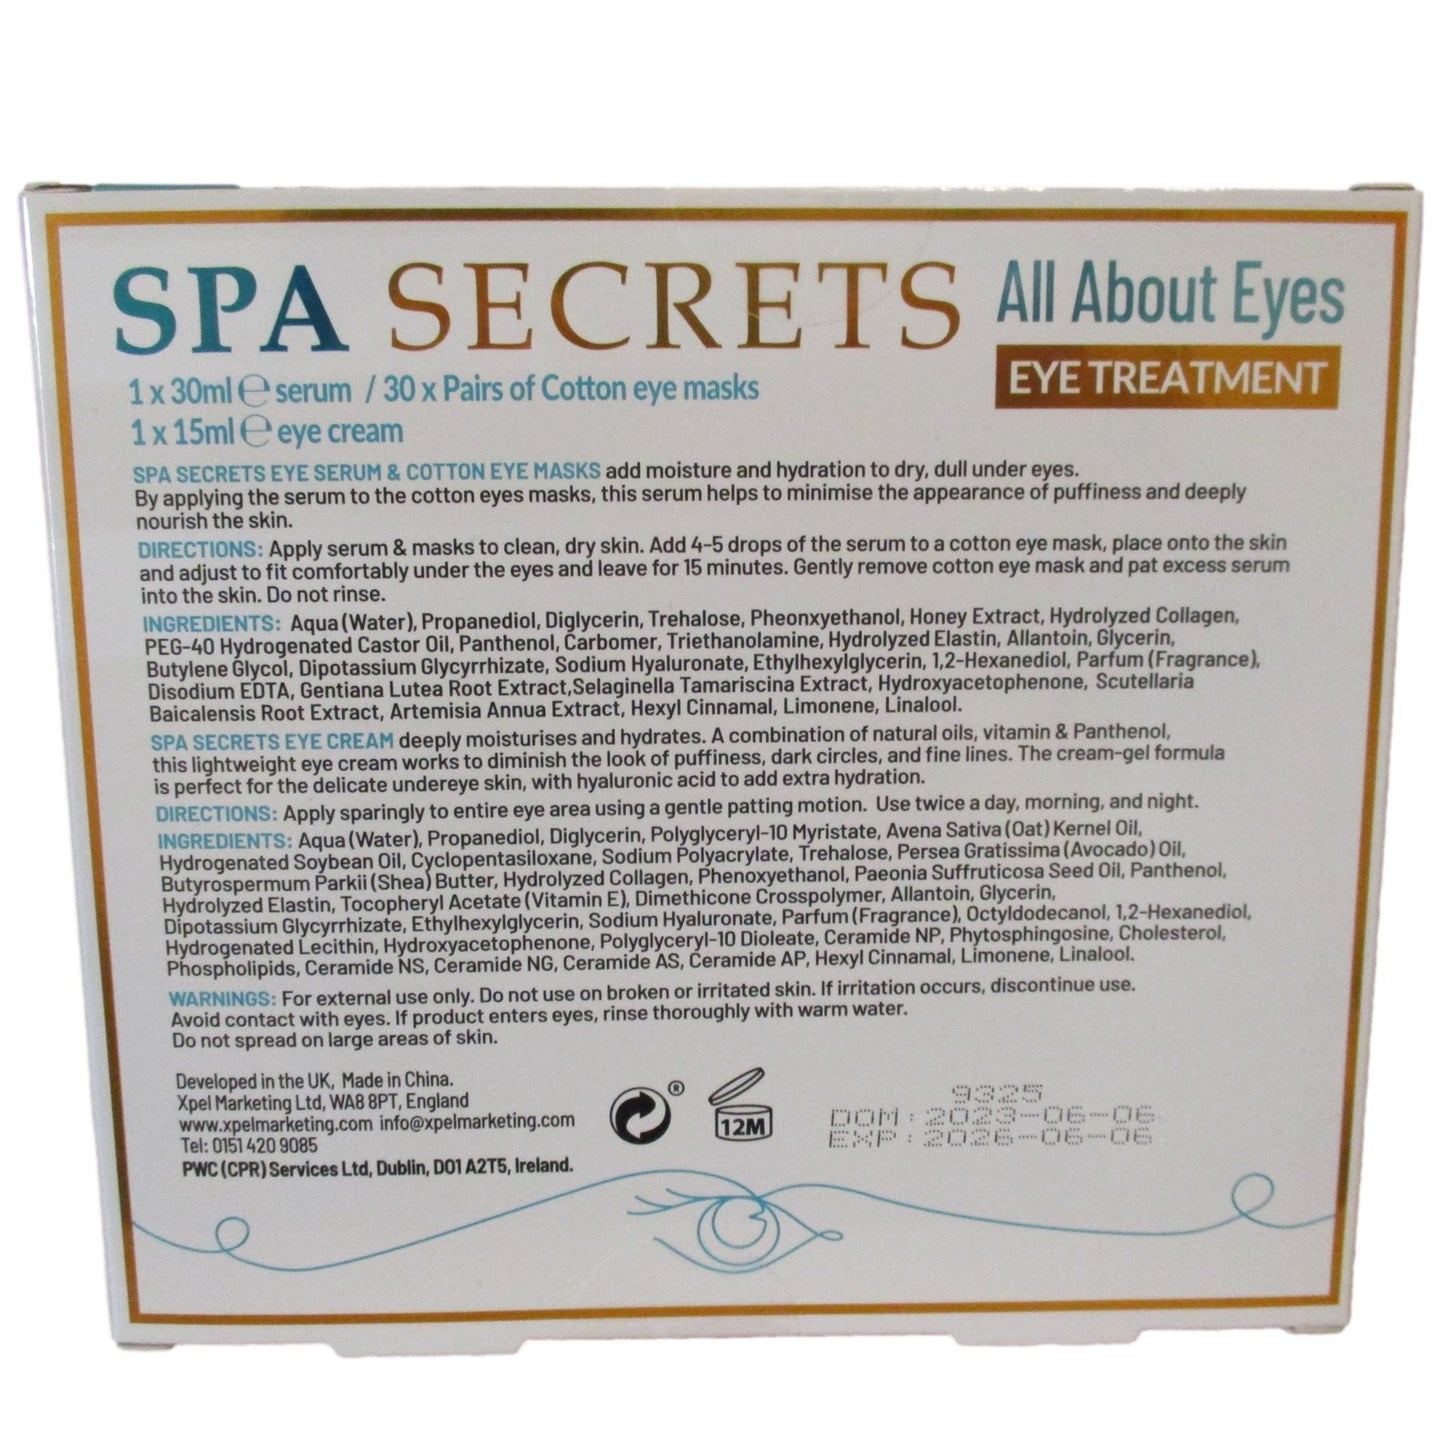 SPA SECRETS " All ABOUT THE EYES - Ideal Gift / Present